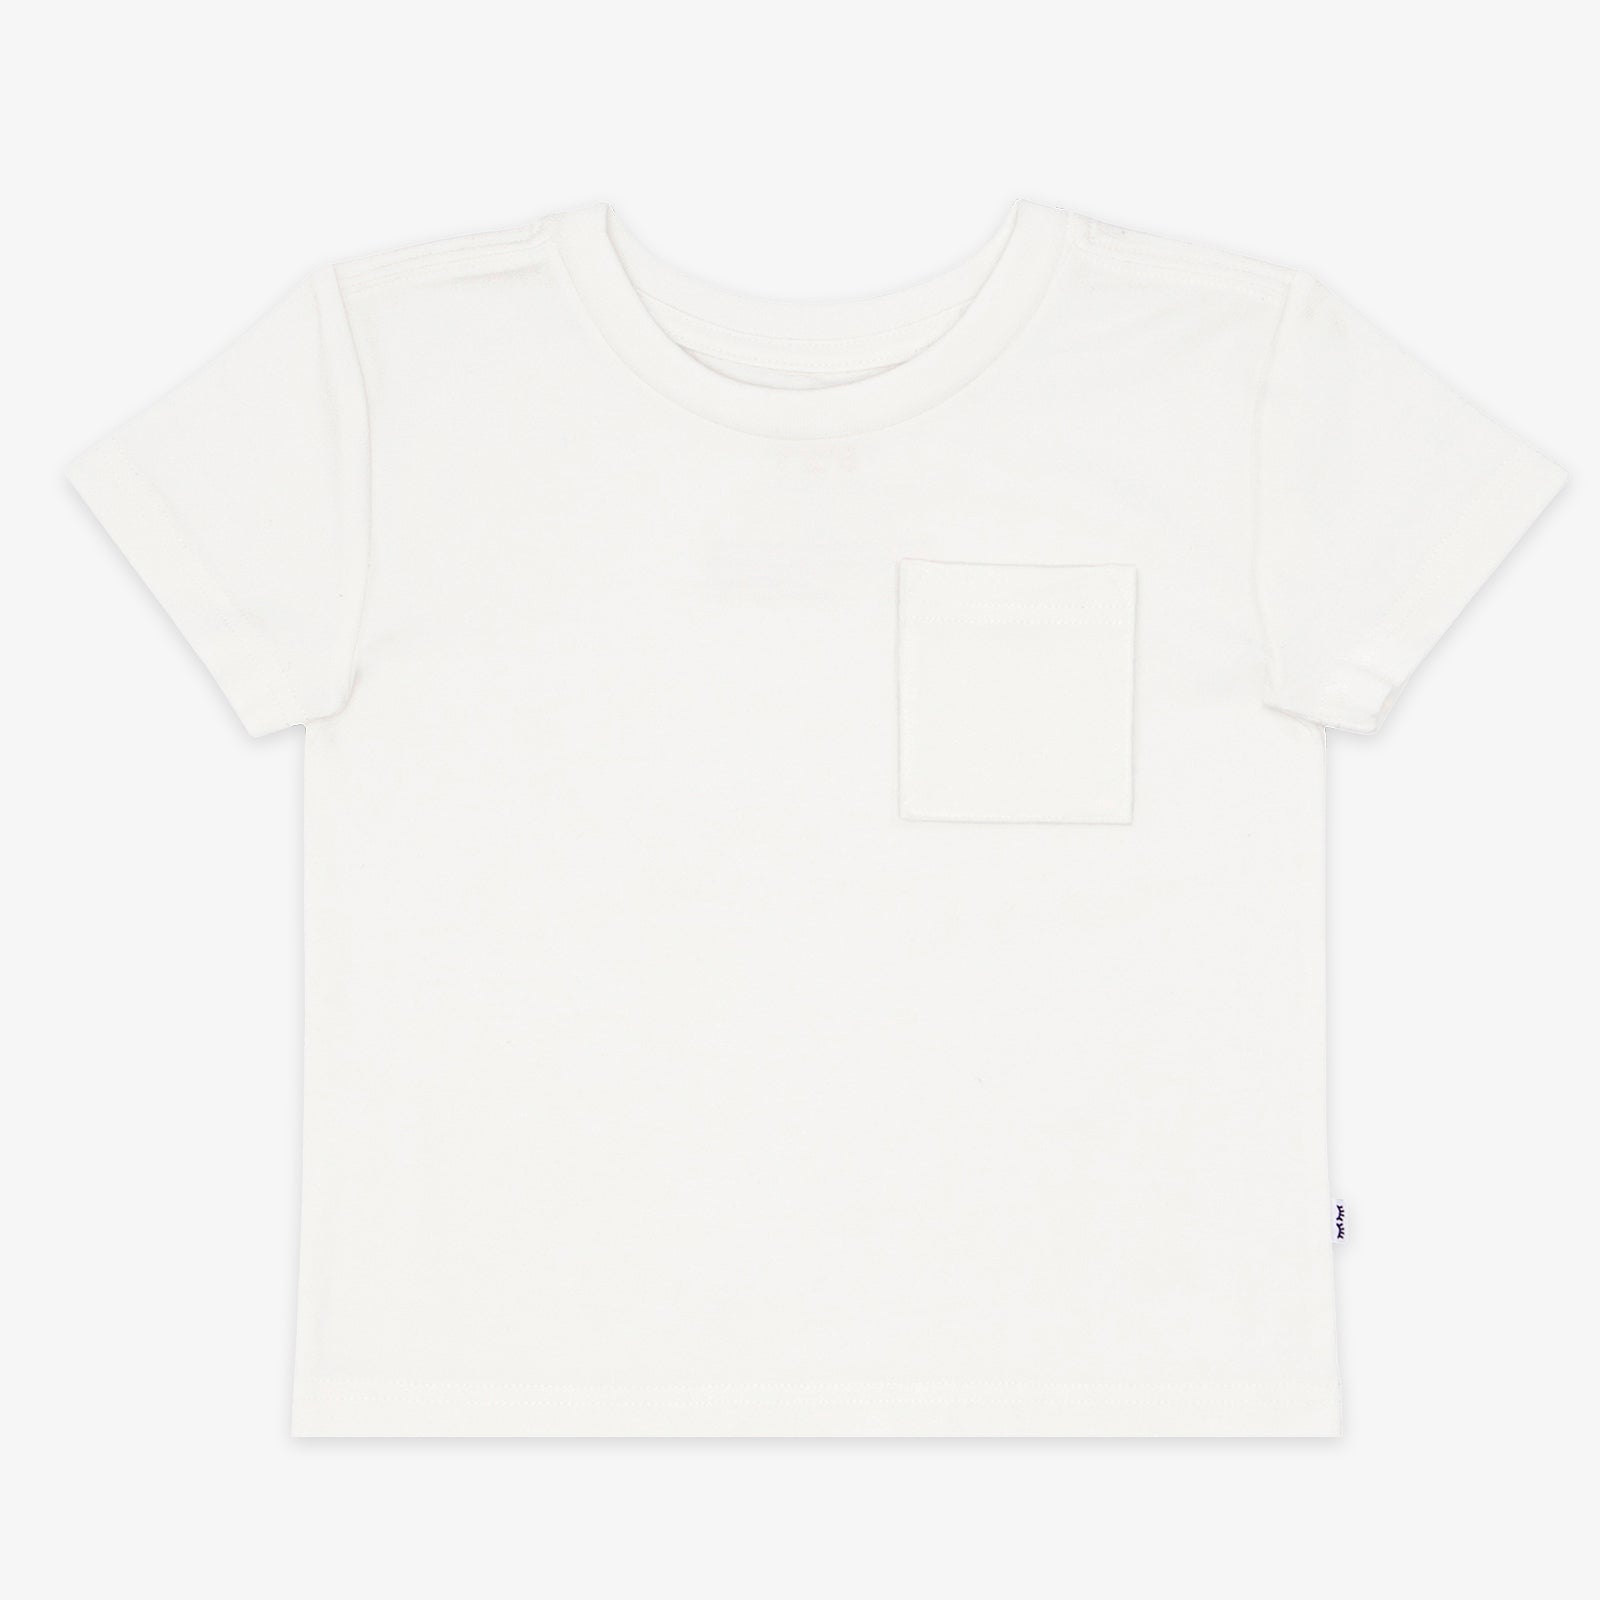 Flat lay image of a Soft White short sleeve relaxed pocket tee